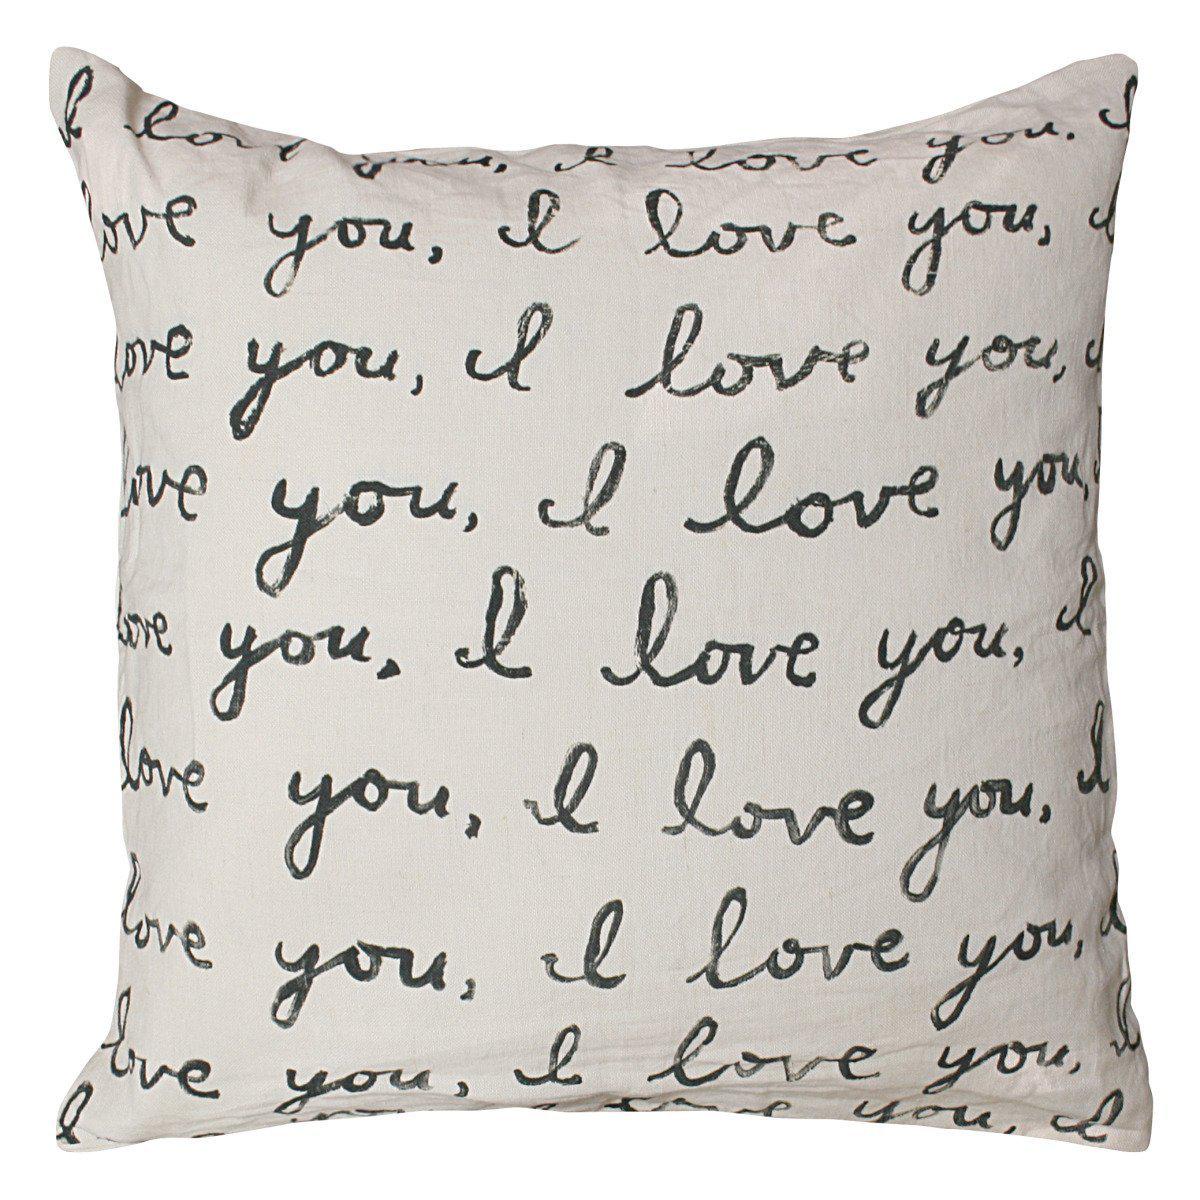 Sugarboo Designs Letter For You Pillow